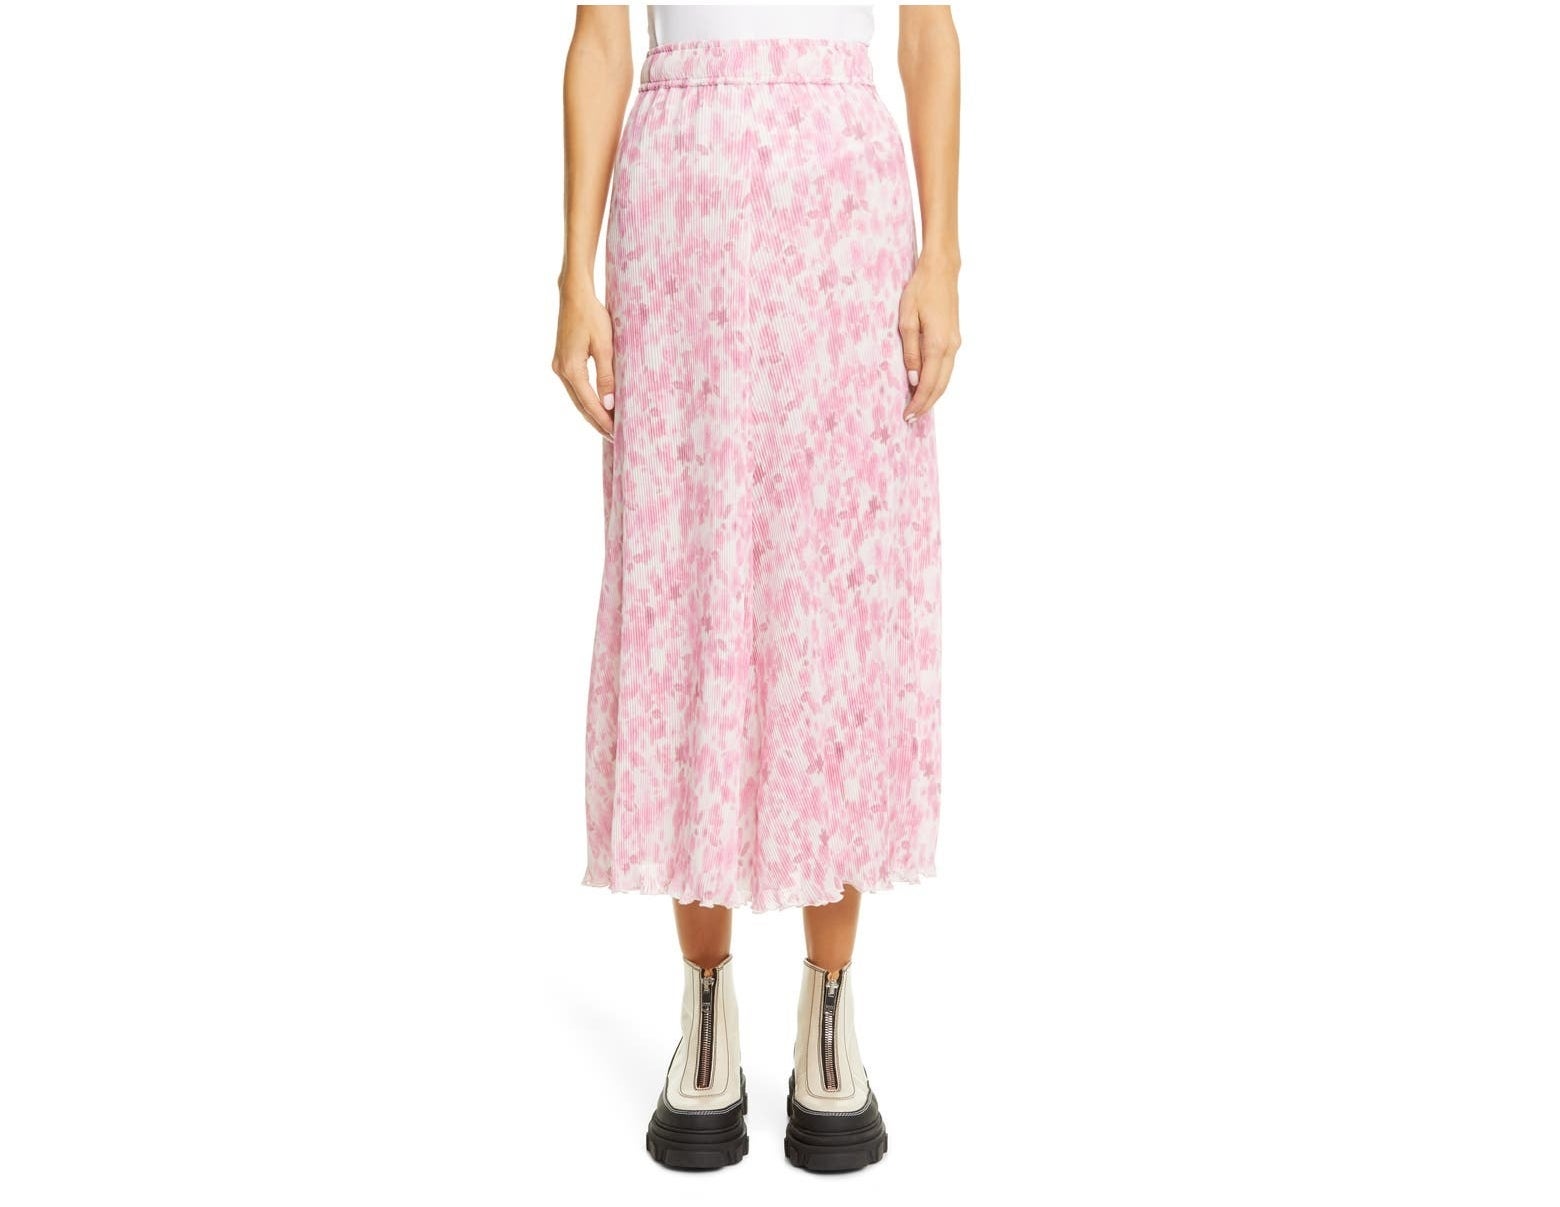 The pink and white pleated midi skirt